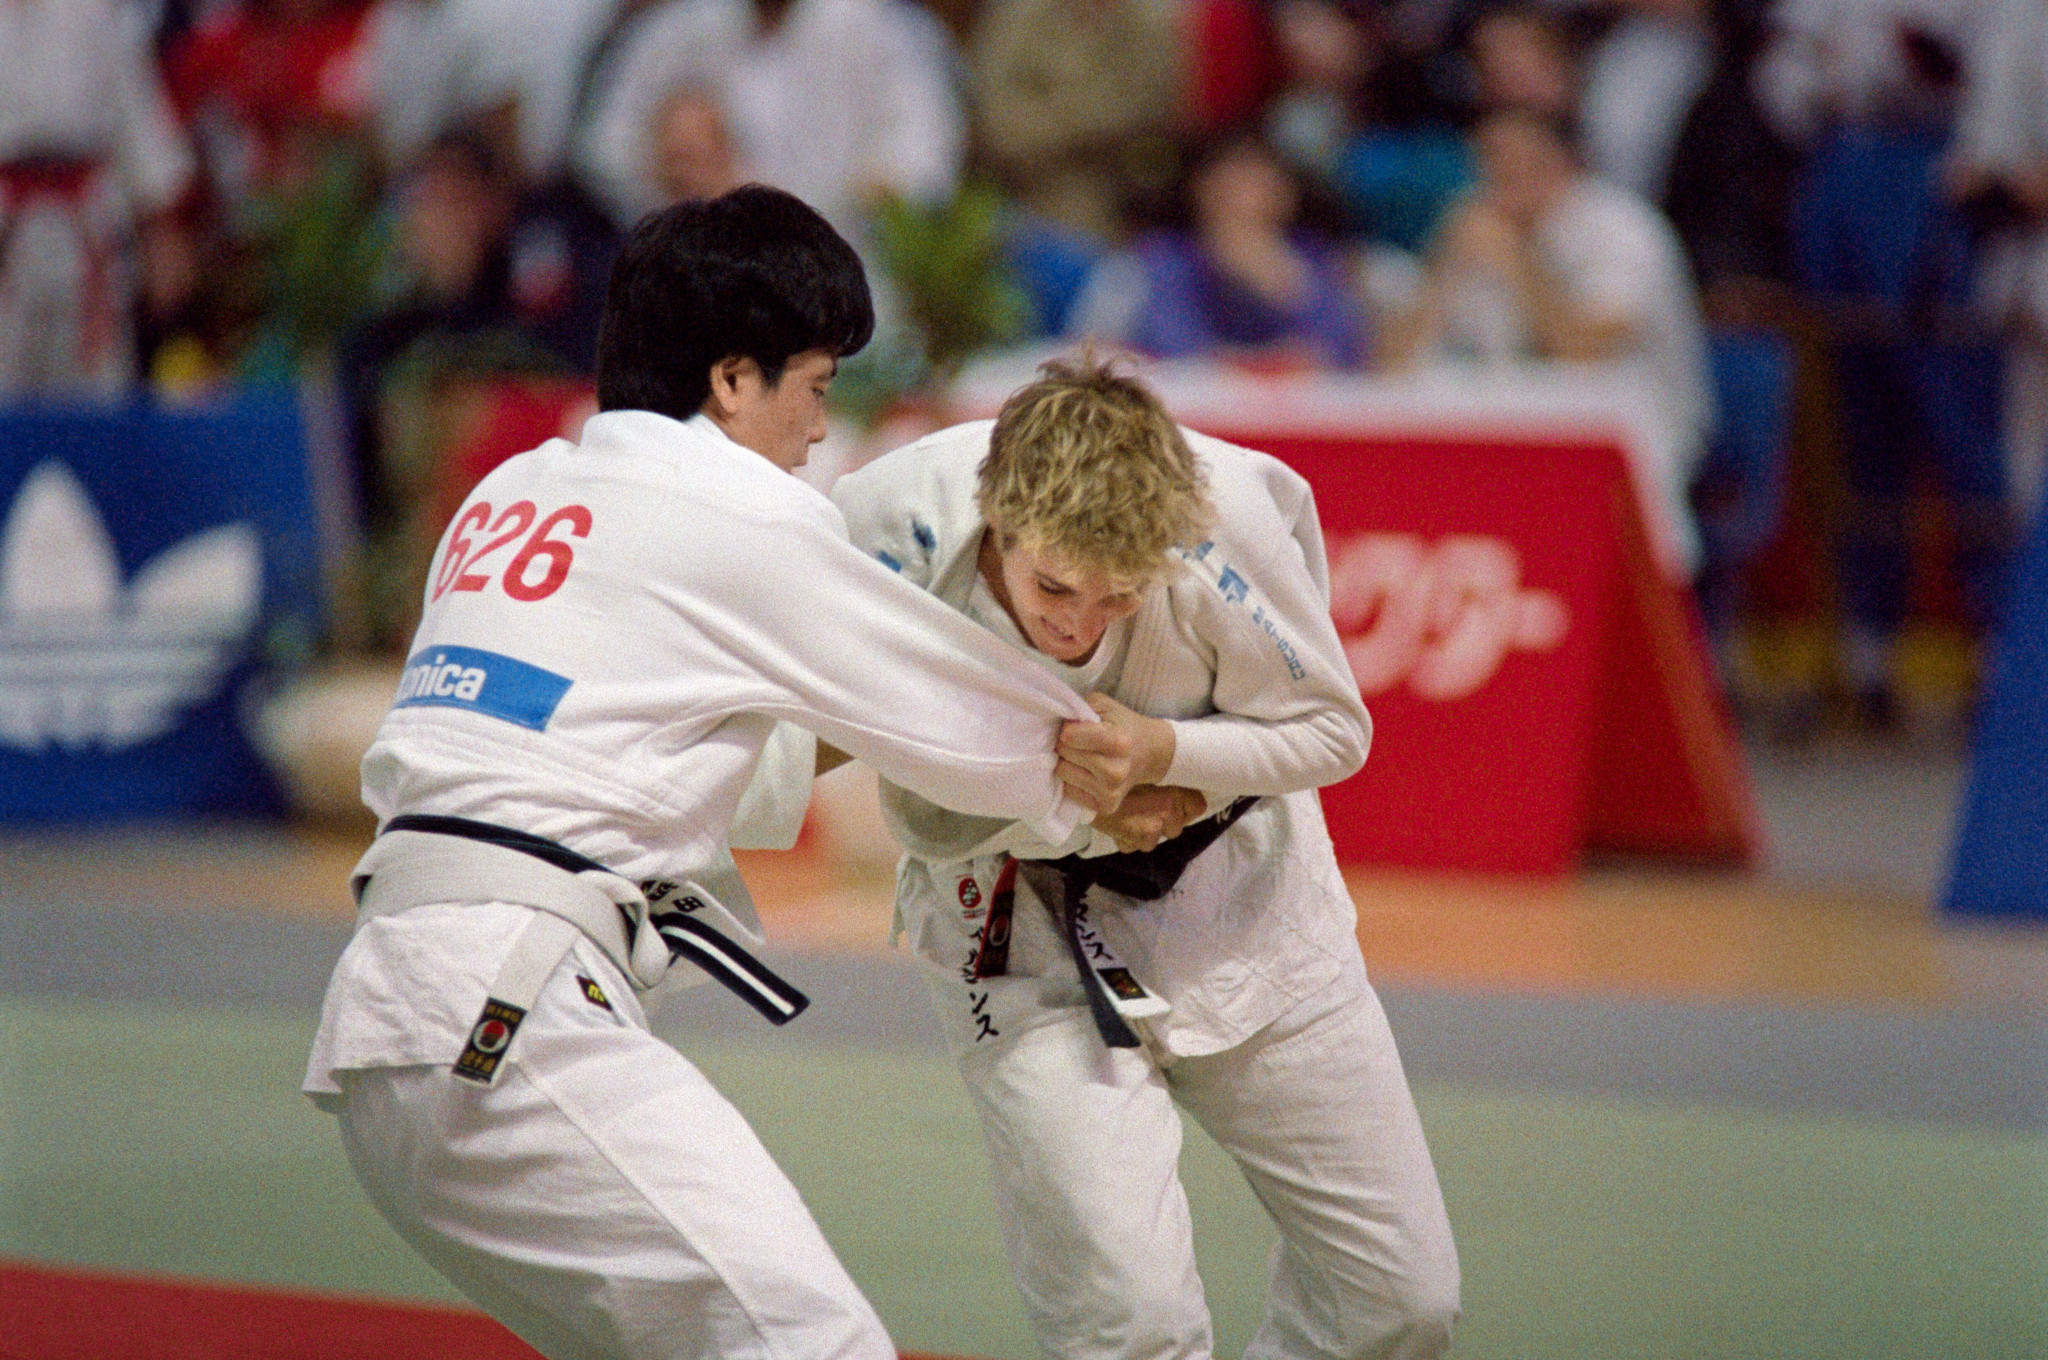 Belgium's Ingrid Berghmans (R) fights Japan's Yoko Tanabe (L) during the Judo World Championships in Belgrad, on October 15, 1989 ©Getty Images